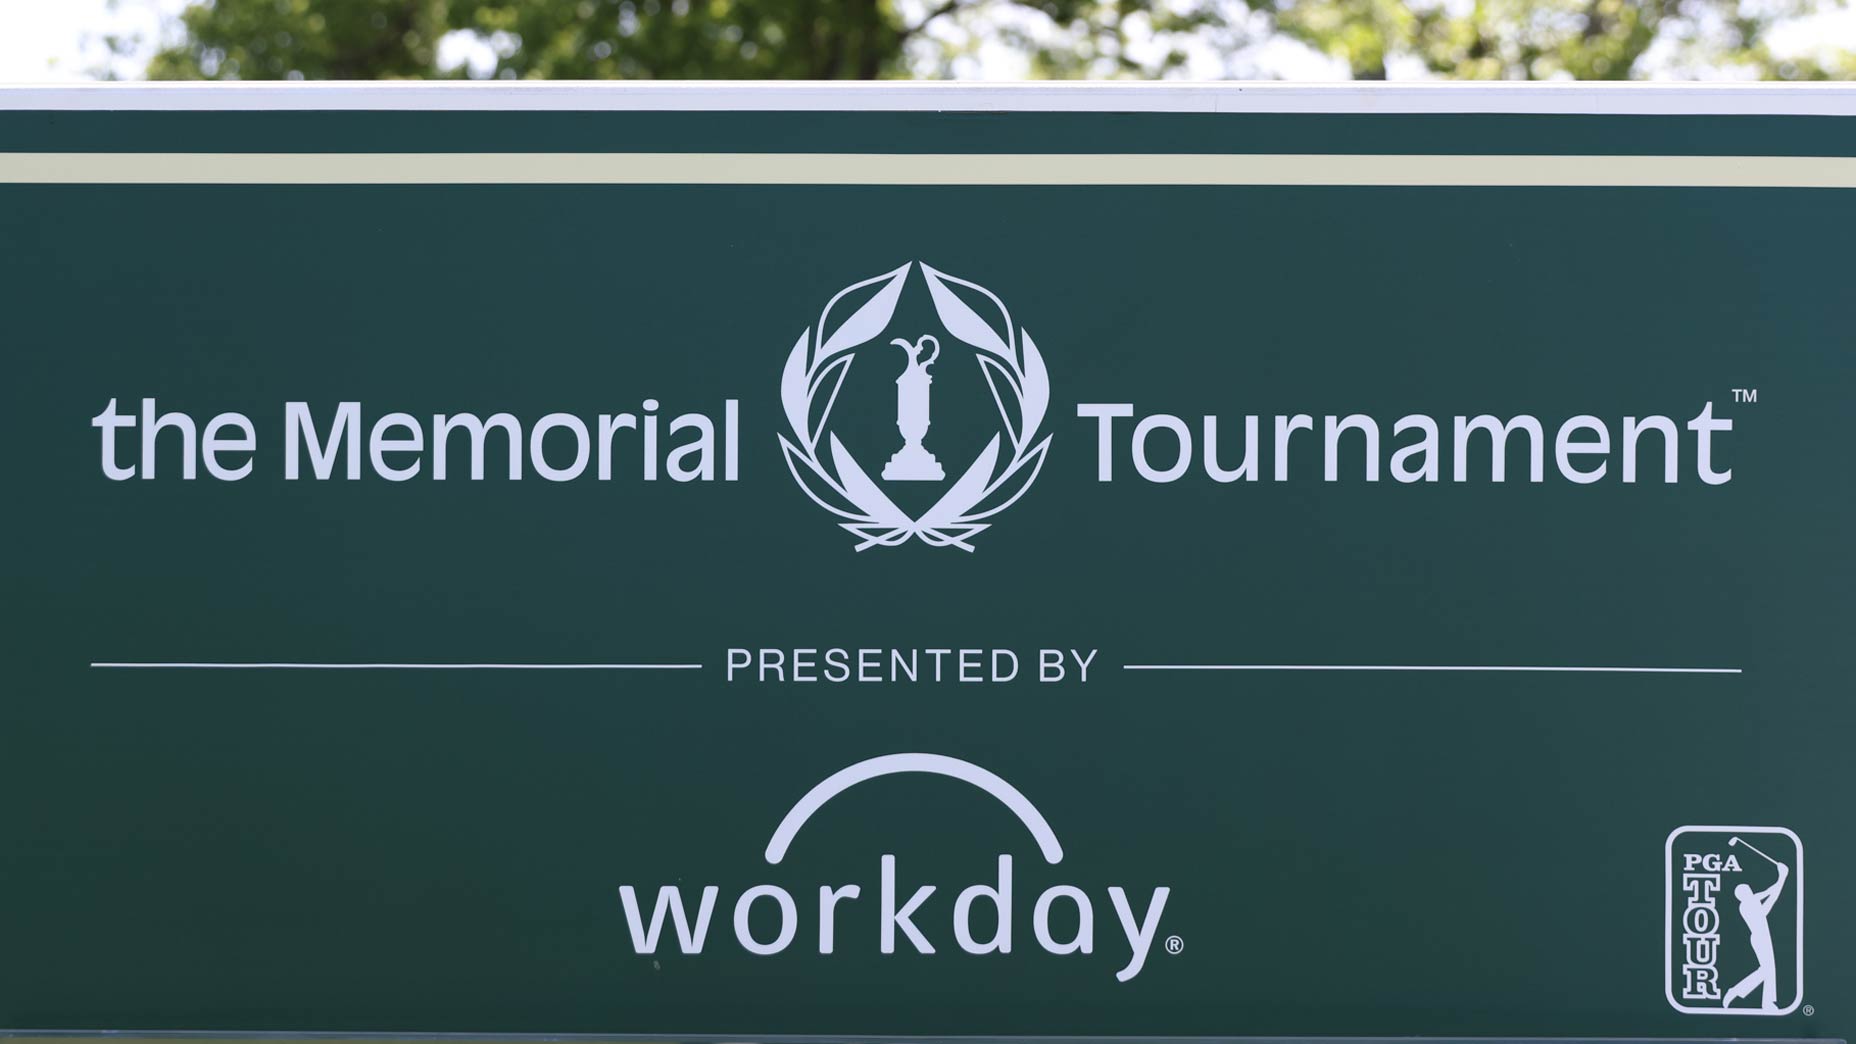 A tournament sign pictured at Muirfield Village during the Memorial Tournament